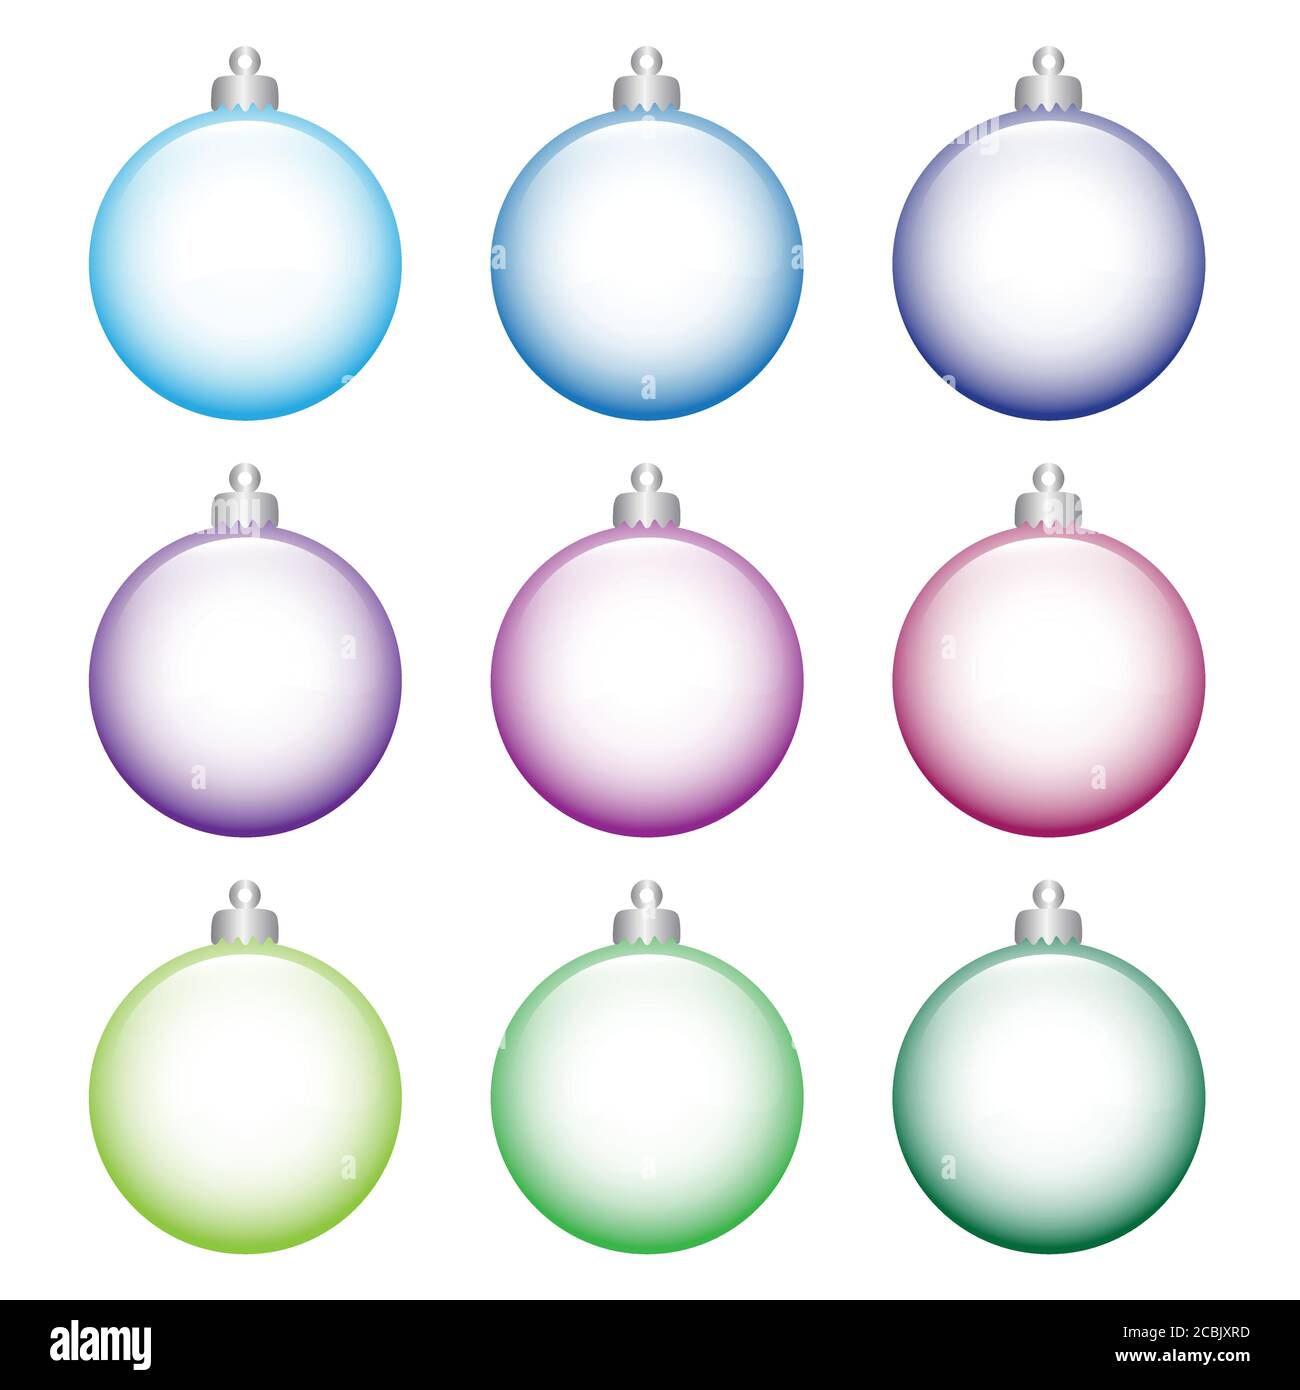 set of colorful Christmas tree balls made of glass on white background vector illustration EPS10 Stock Vector